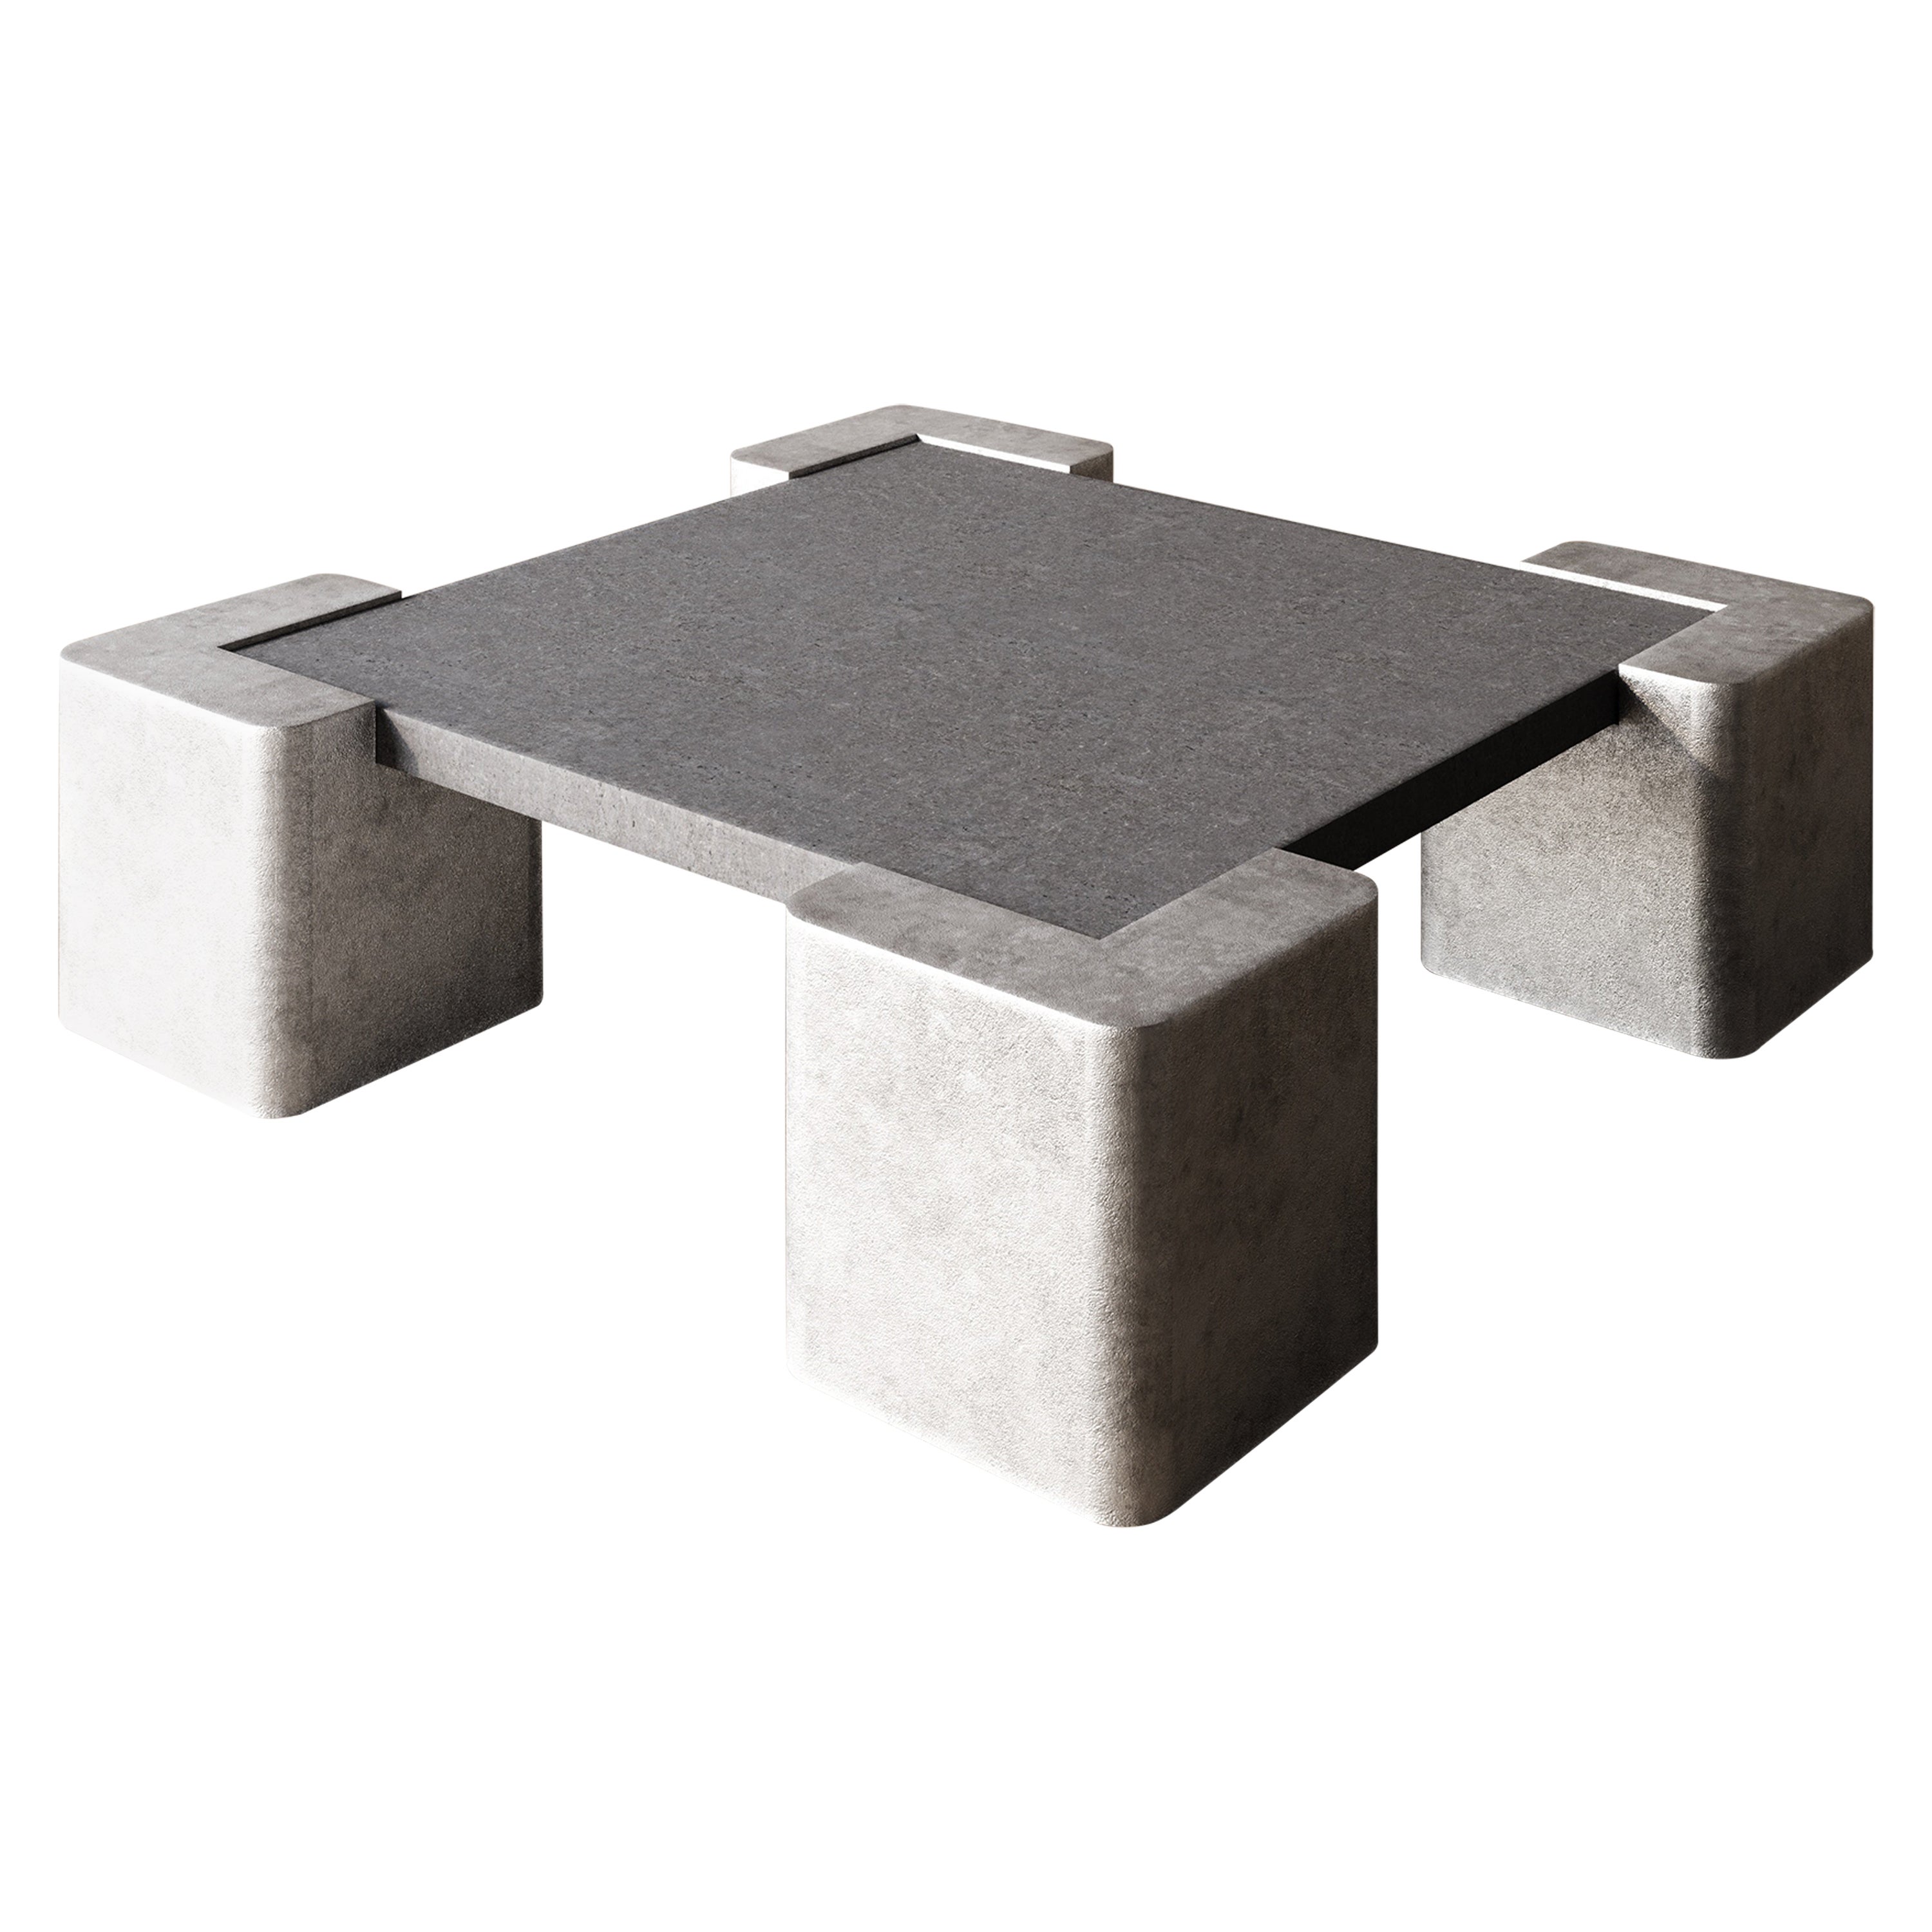 Nº 202 Sand-Cast Aluminum + Volcanic Stone Low Table by Amee Allsop Studio